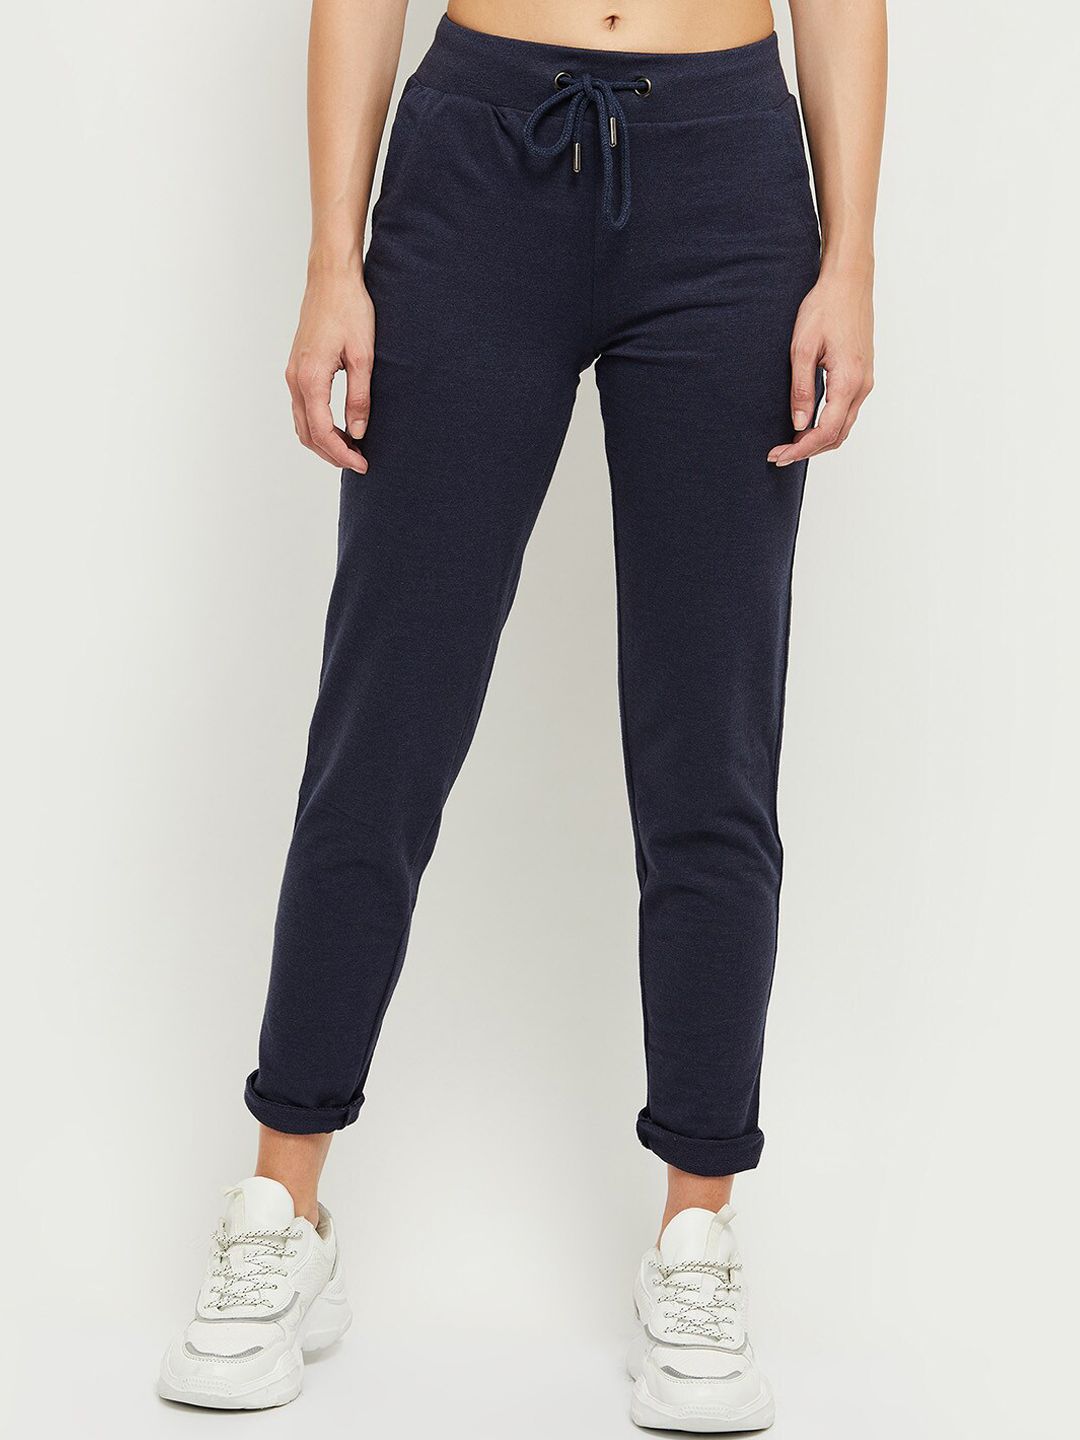 max Women Blue Solid Regular Track Pants Price in India